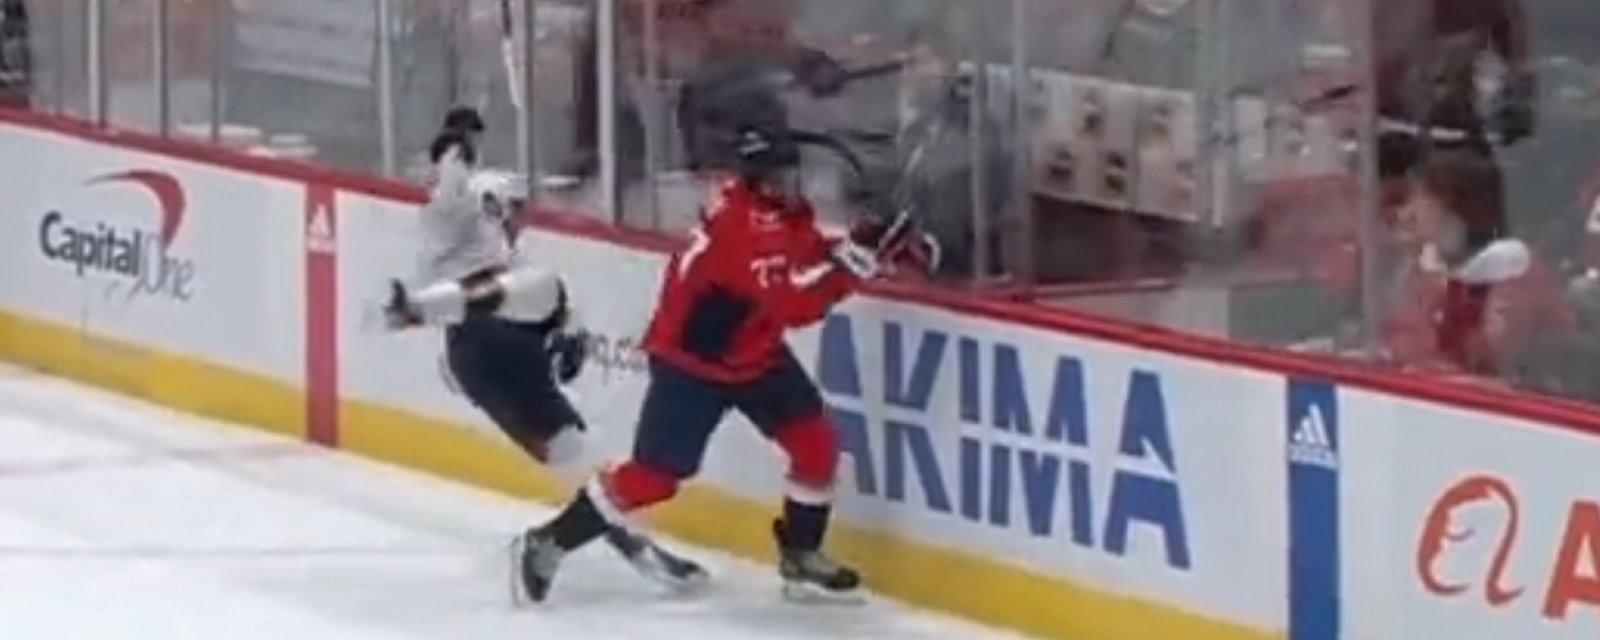 T.J Oshie welcomes Adam Fantilli to the NHL with a big hit.